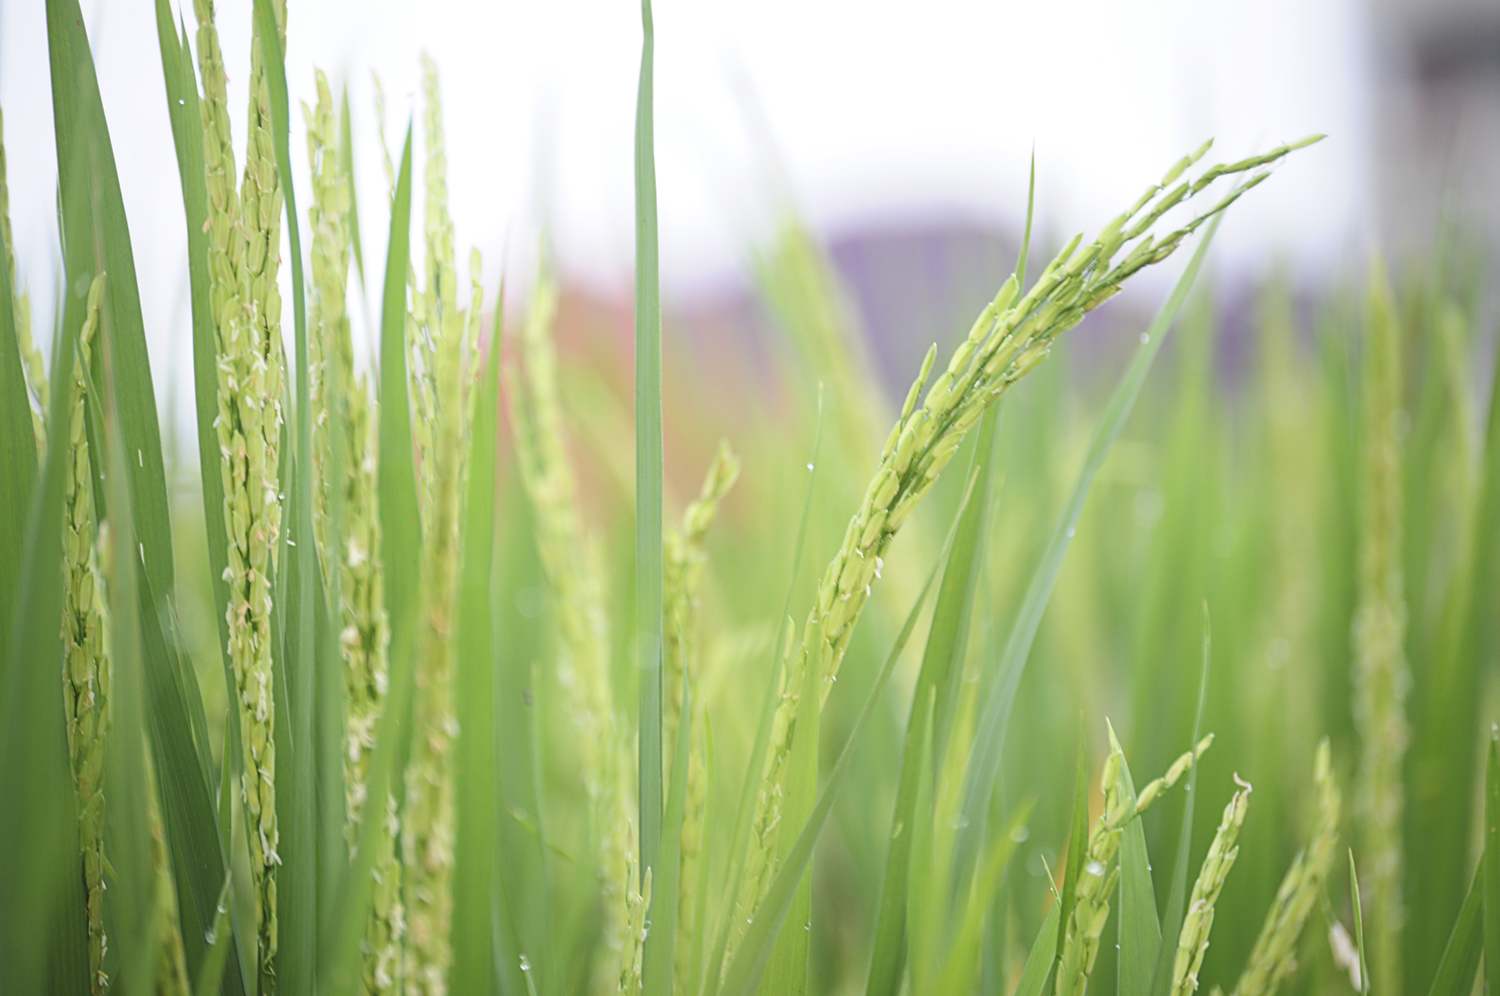 BRIA contributes to sustainable rice production in Southeast Asia with the SRP standard